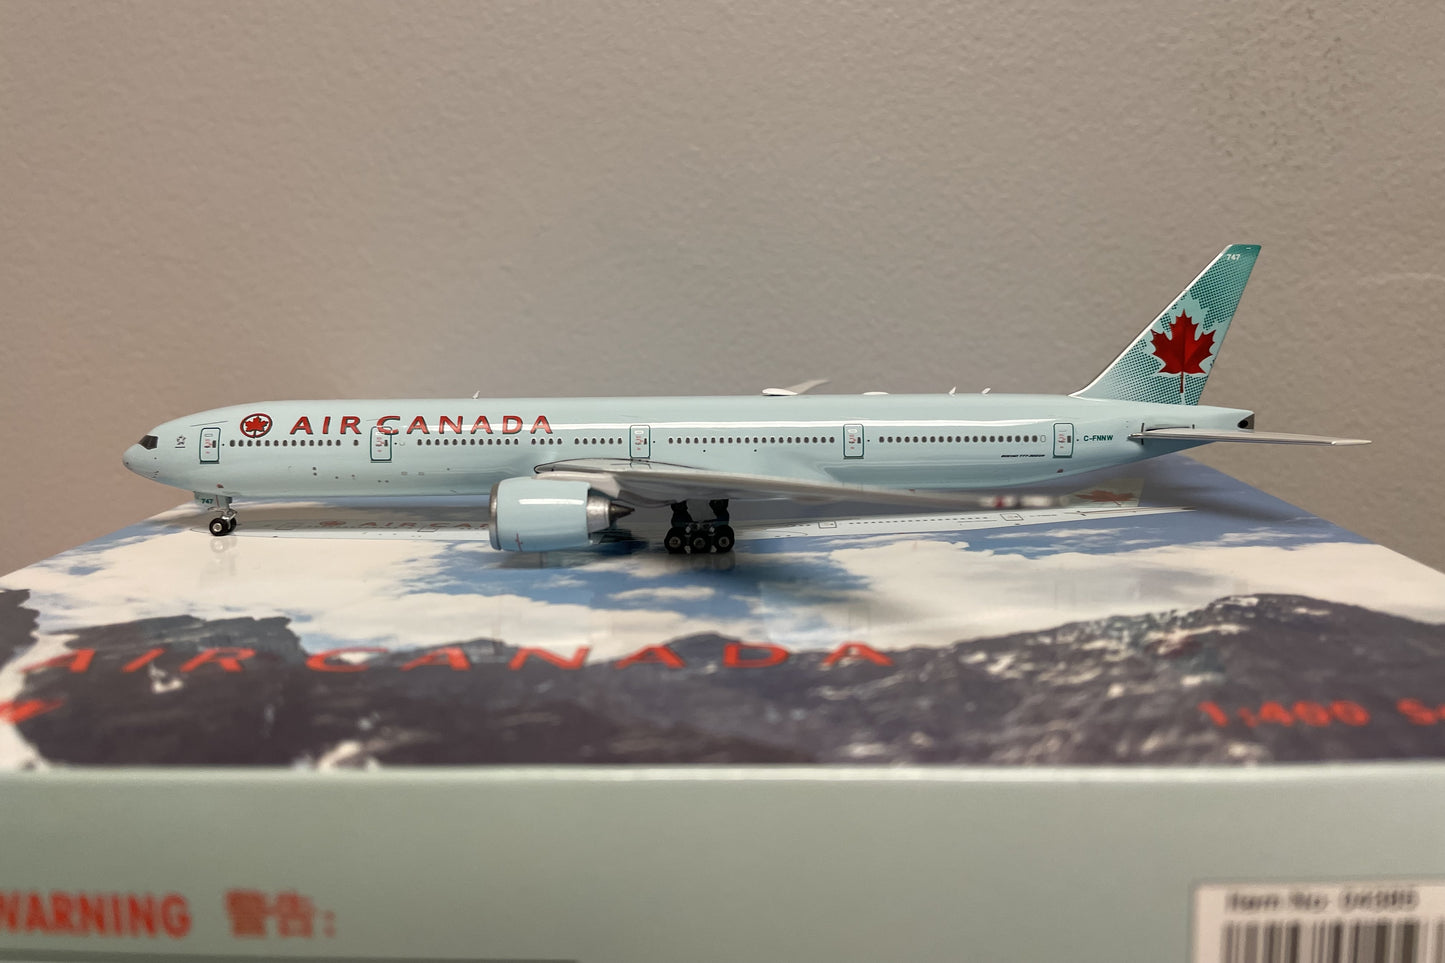 1:400 Phoenix Models Air Canada Boeing 777-300ER "Toothpaste" C-FNNW PH4385